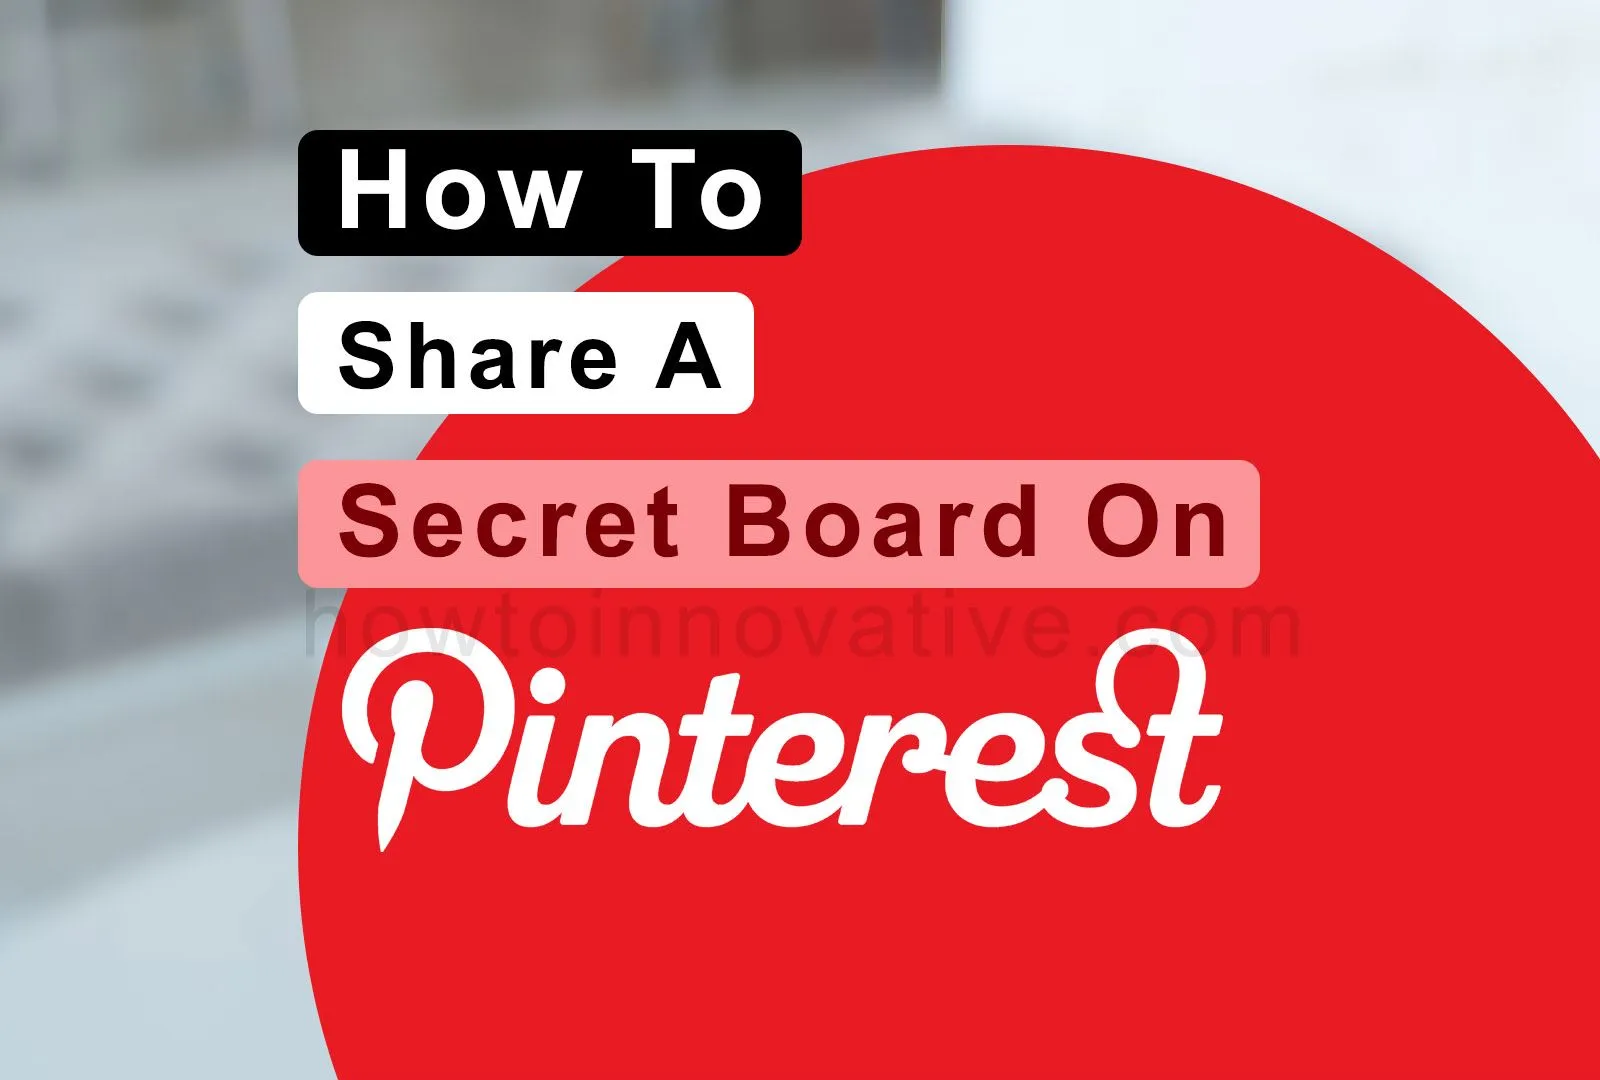 How To Share A Secret Board On Pinterest